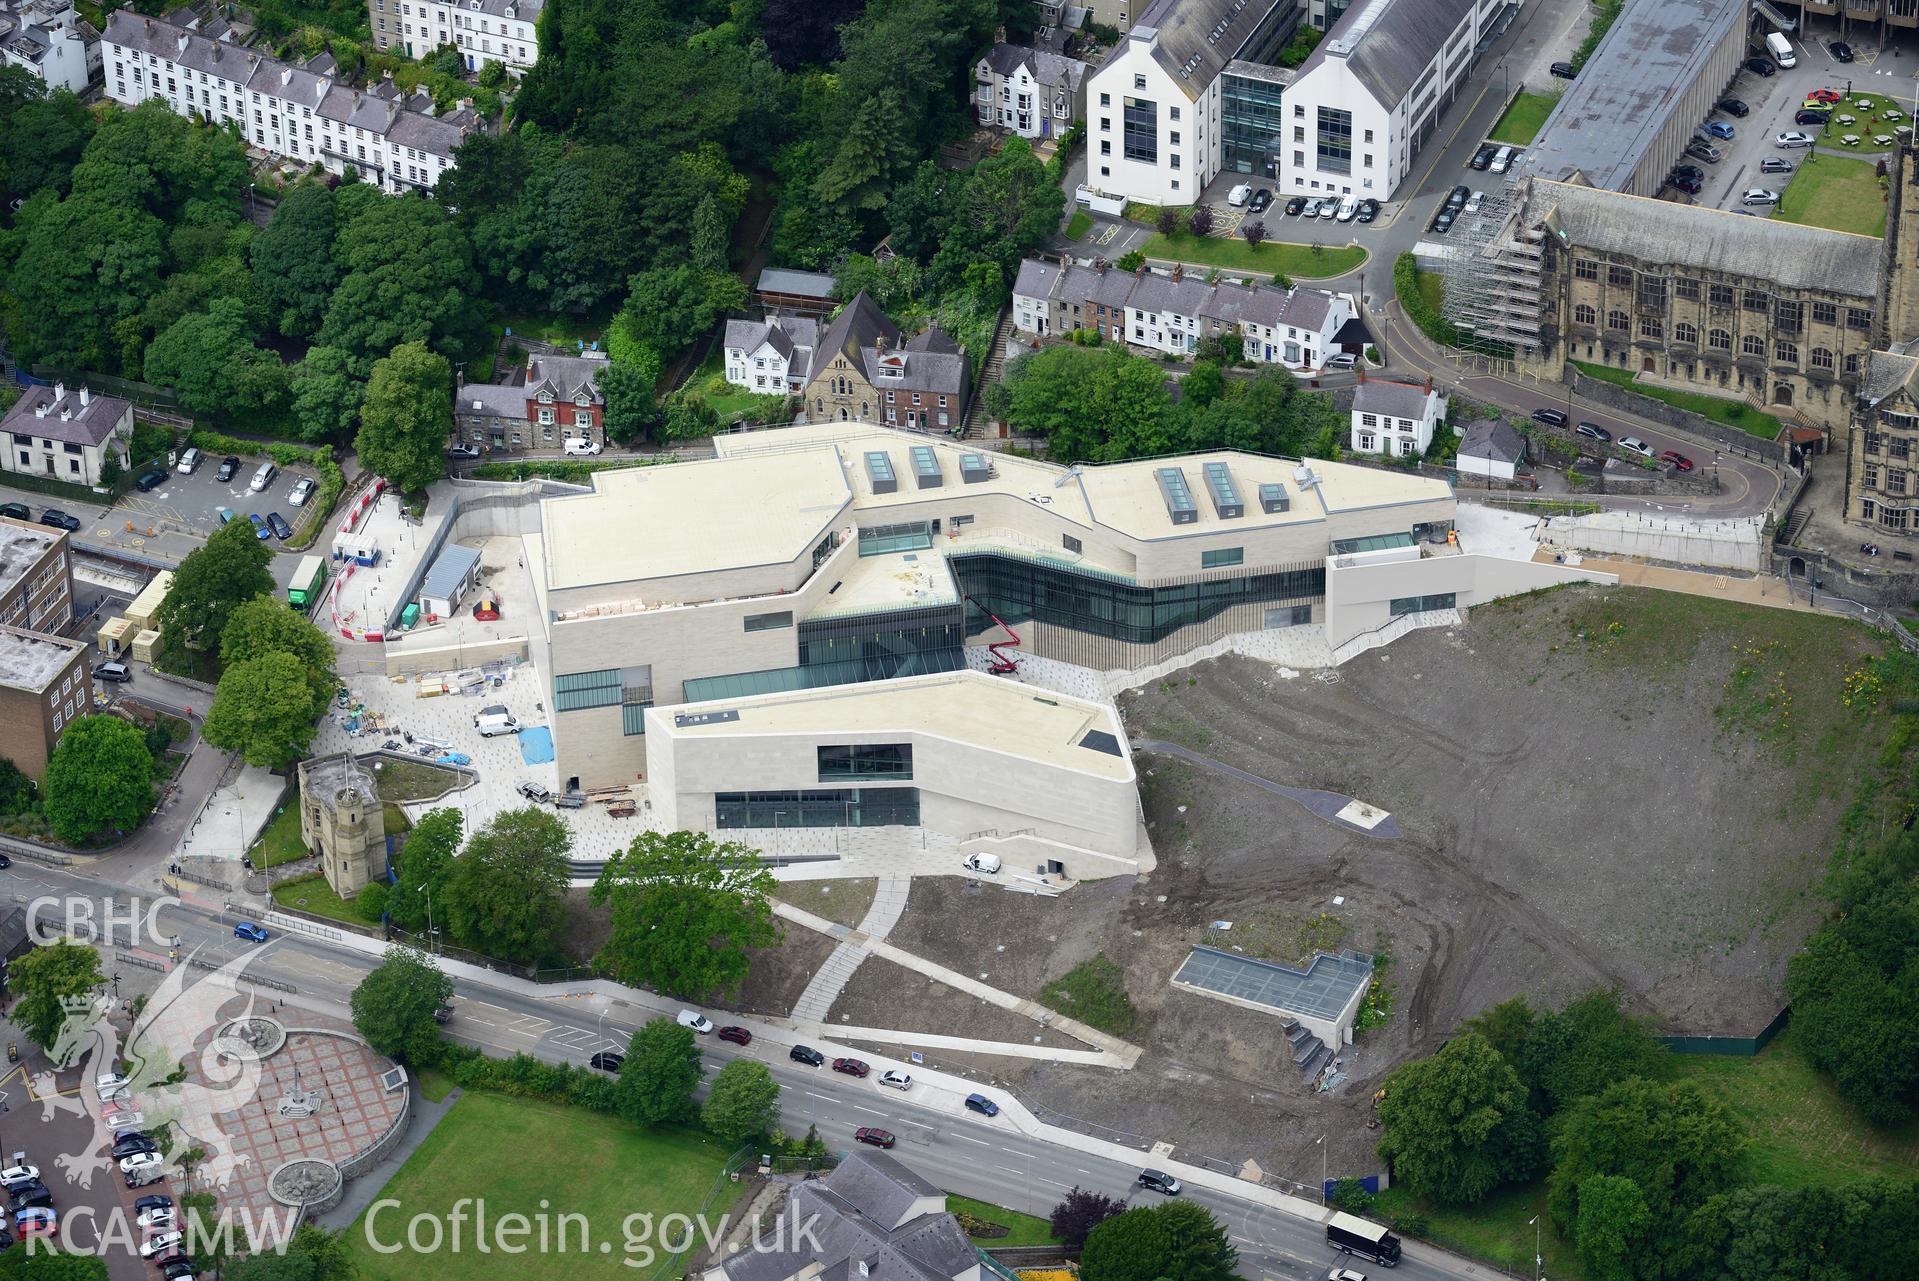 Bangor University, Theatr Gwynedd(demolished),Pontio, town hall, library, medieval church site & war memorial. Oblique aerial photograph taken during the Royal Commission's programme of archaeological aerial reconnaissance by Toby Driver on 30th July 2015.